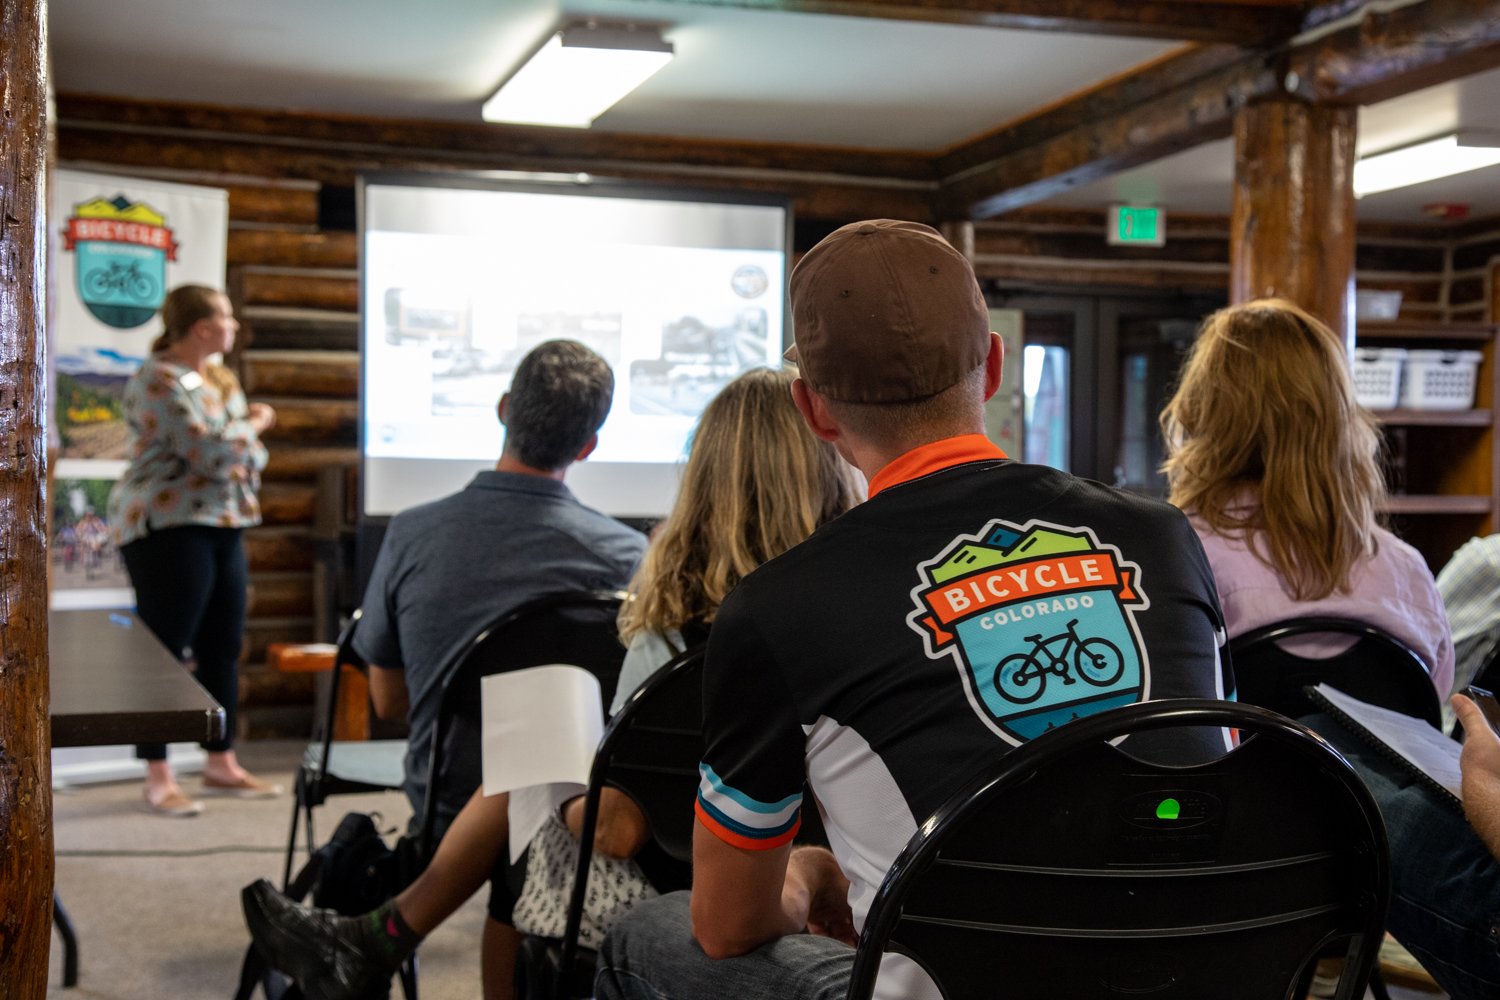 A person wearing a Bicycle Colorado jersey sitting in a chair in the audience of a presentation in the background.